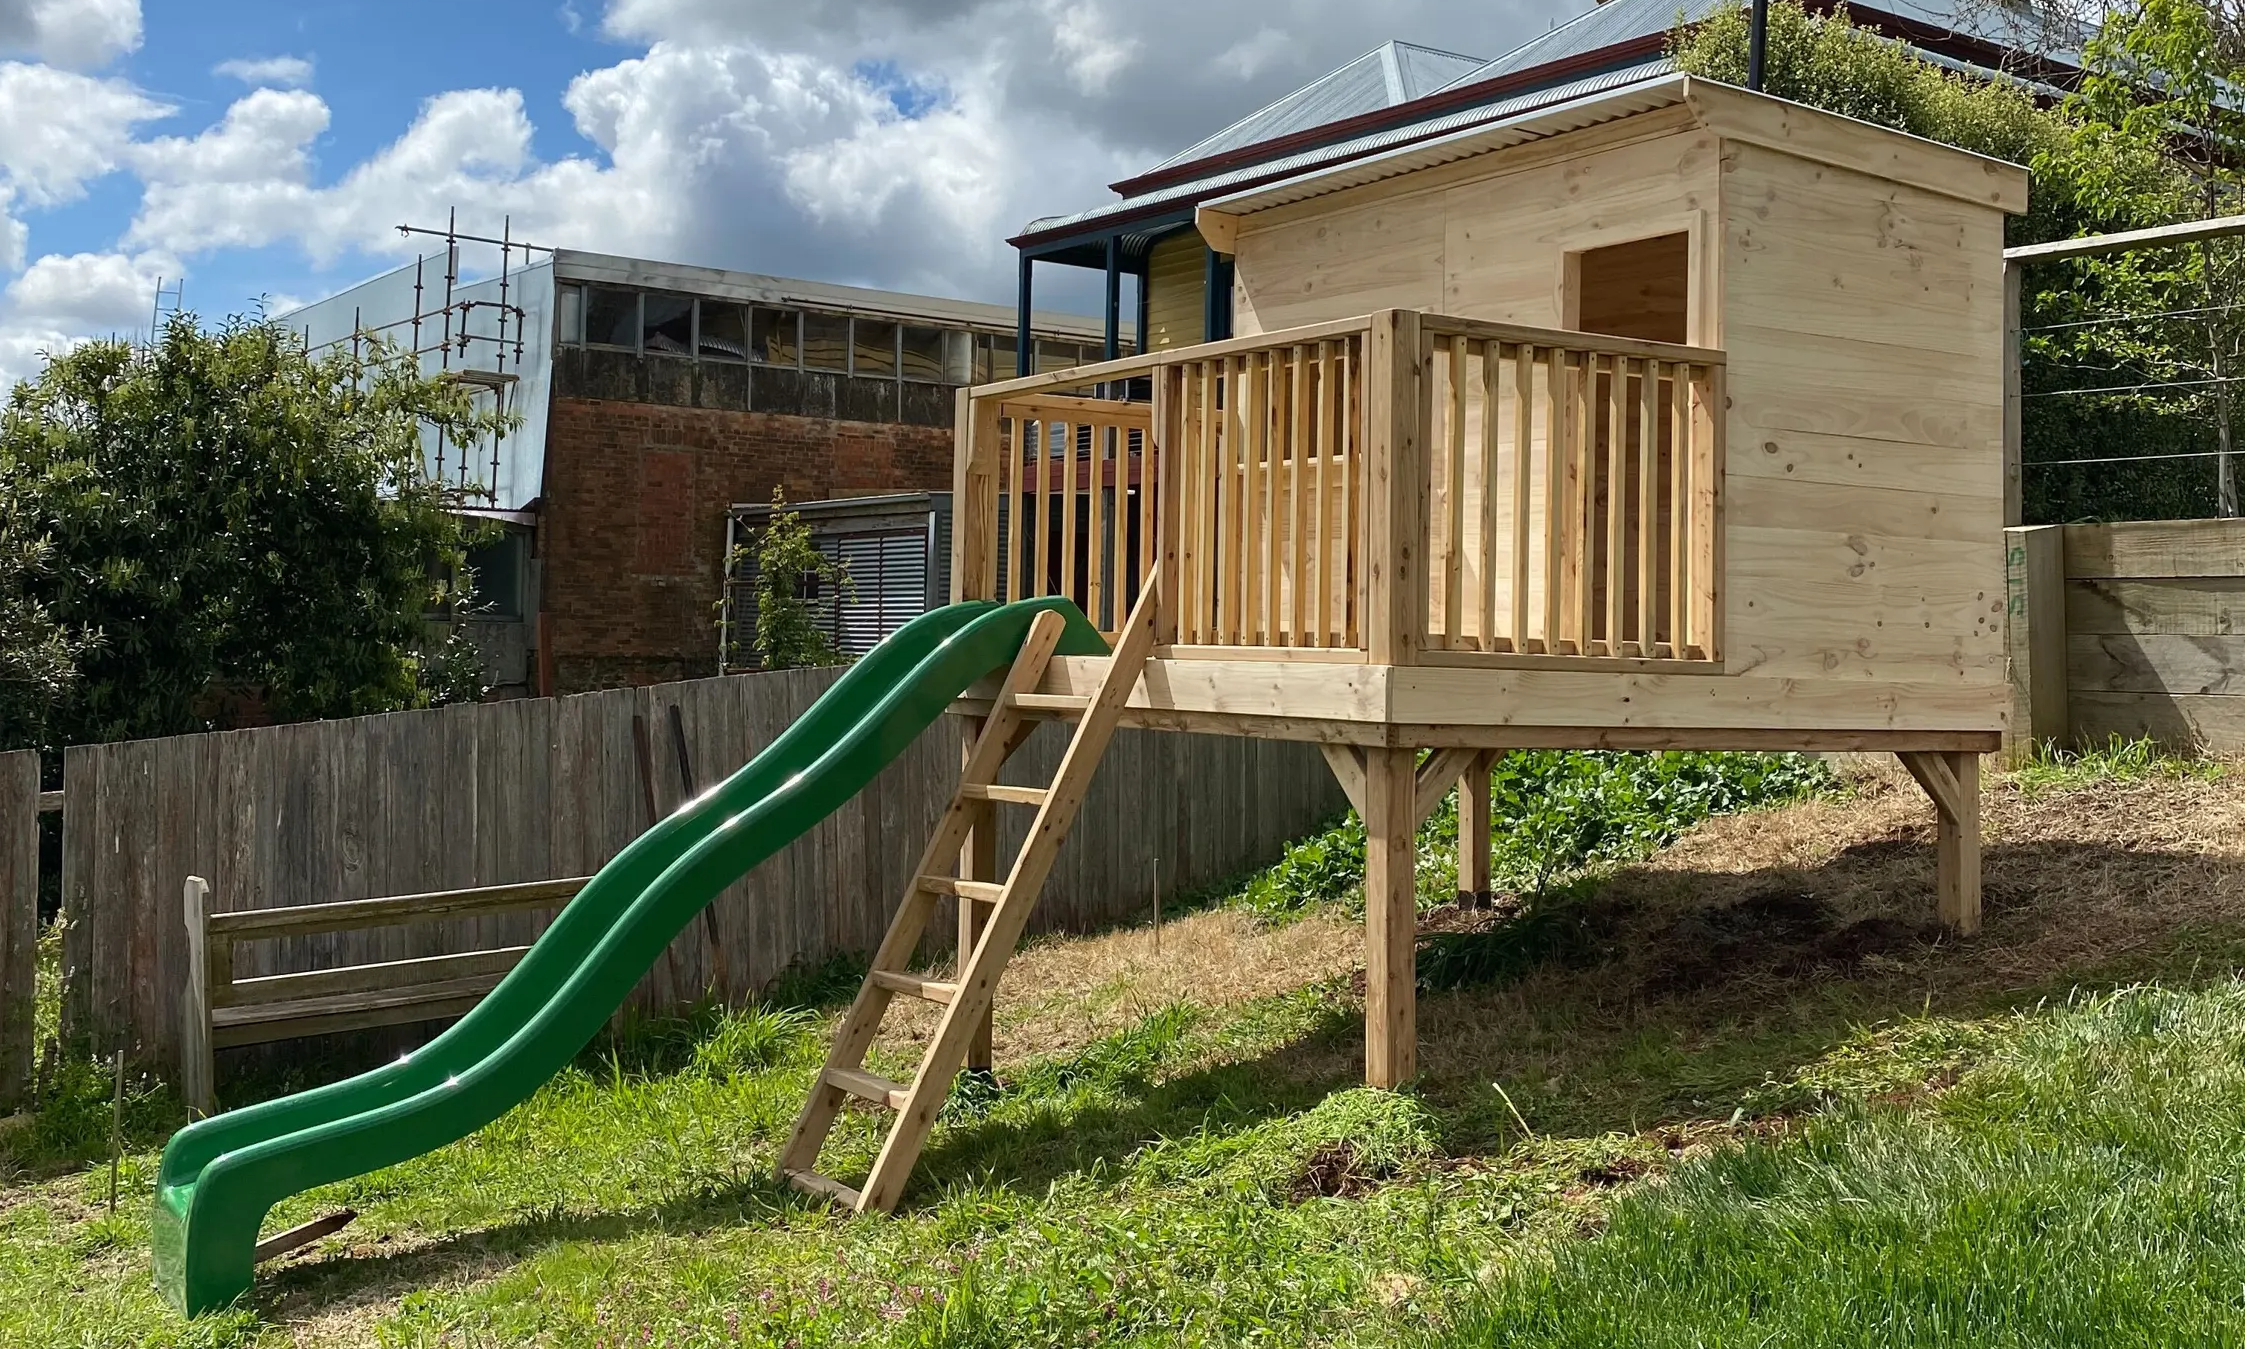 A tree house style designed for families, cubby house